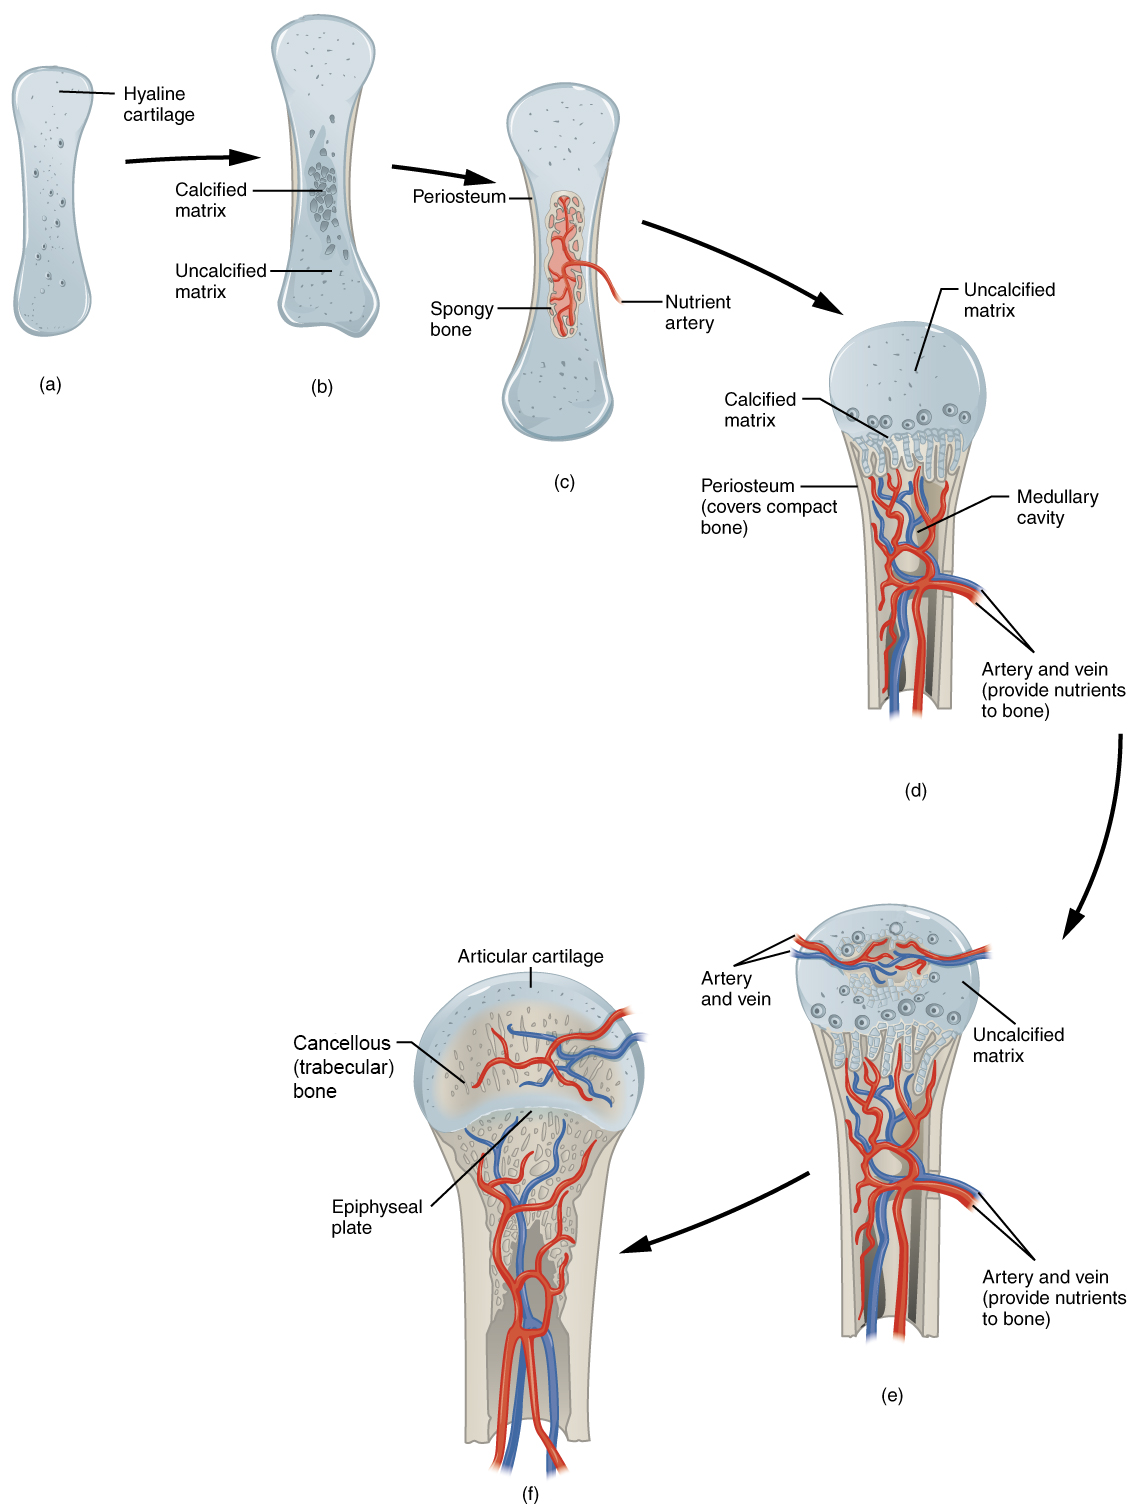 The phases of endochondral ossification.